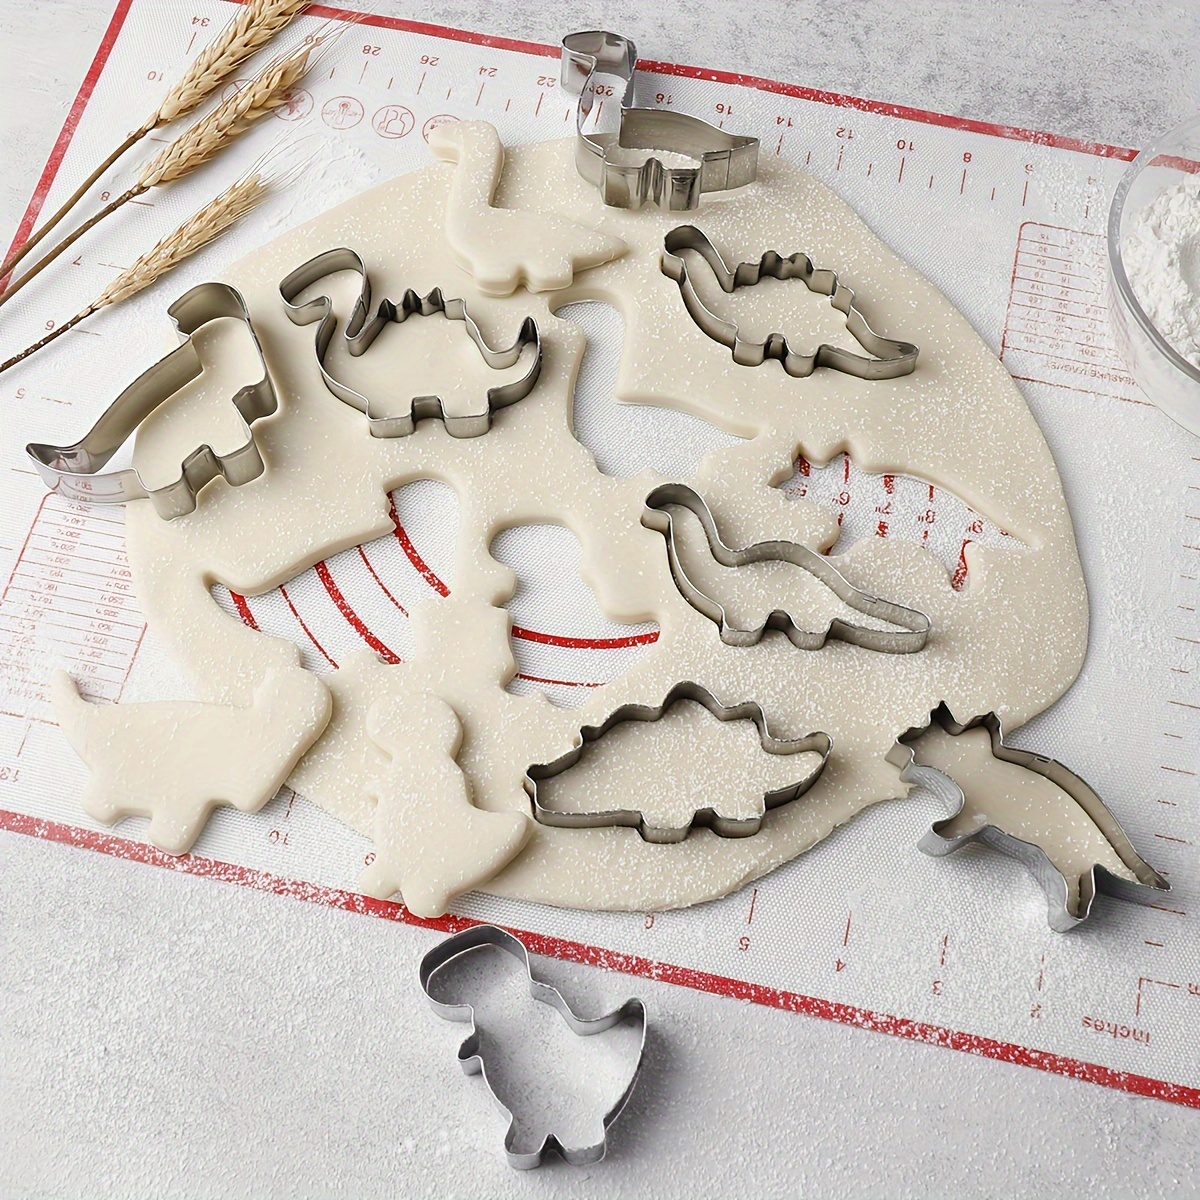 

8pcs, Dinosaur Cookie Cutters, Stainless Steel Pastry Cutter, Biscuit Molds, Baking Tools, Kitchen Accessories